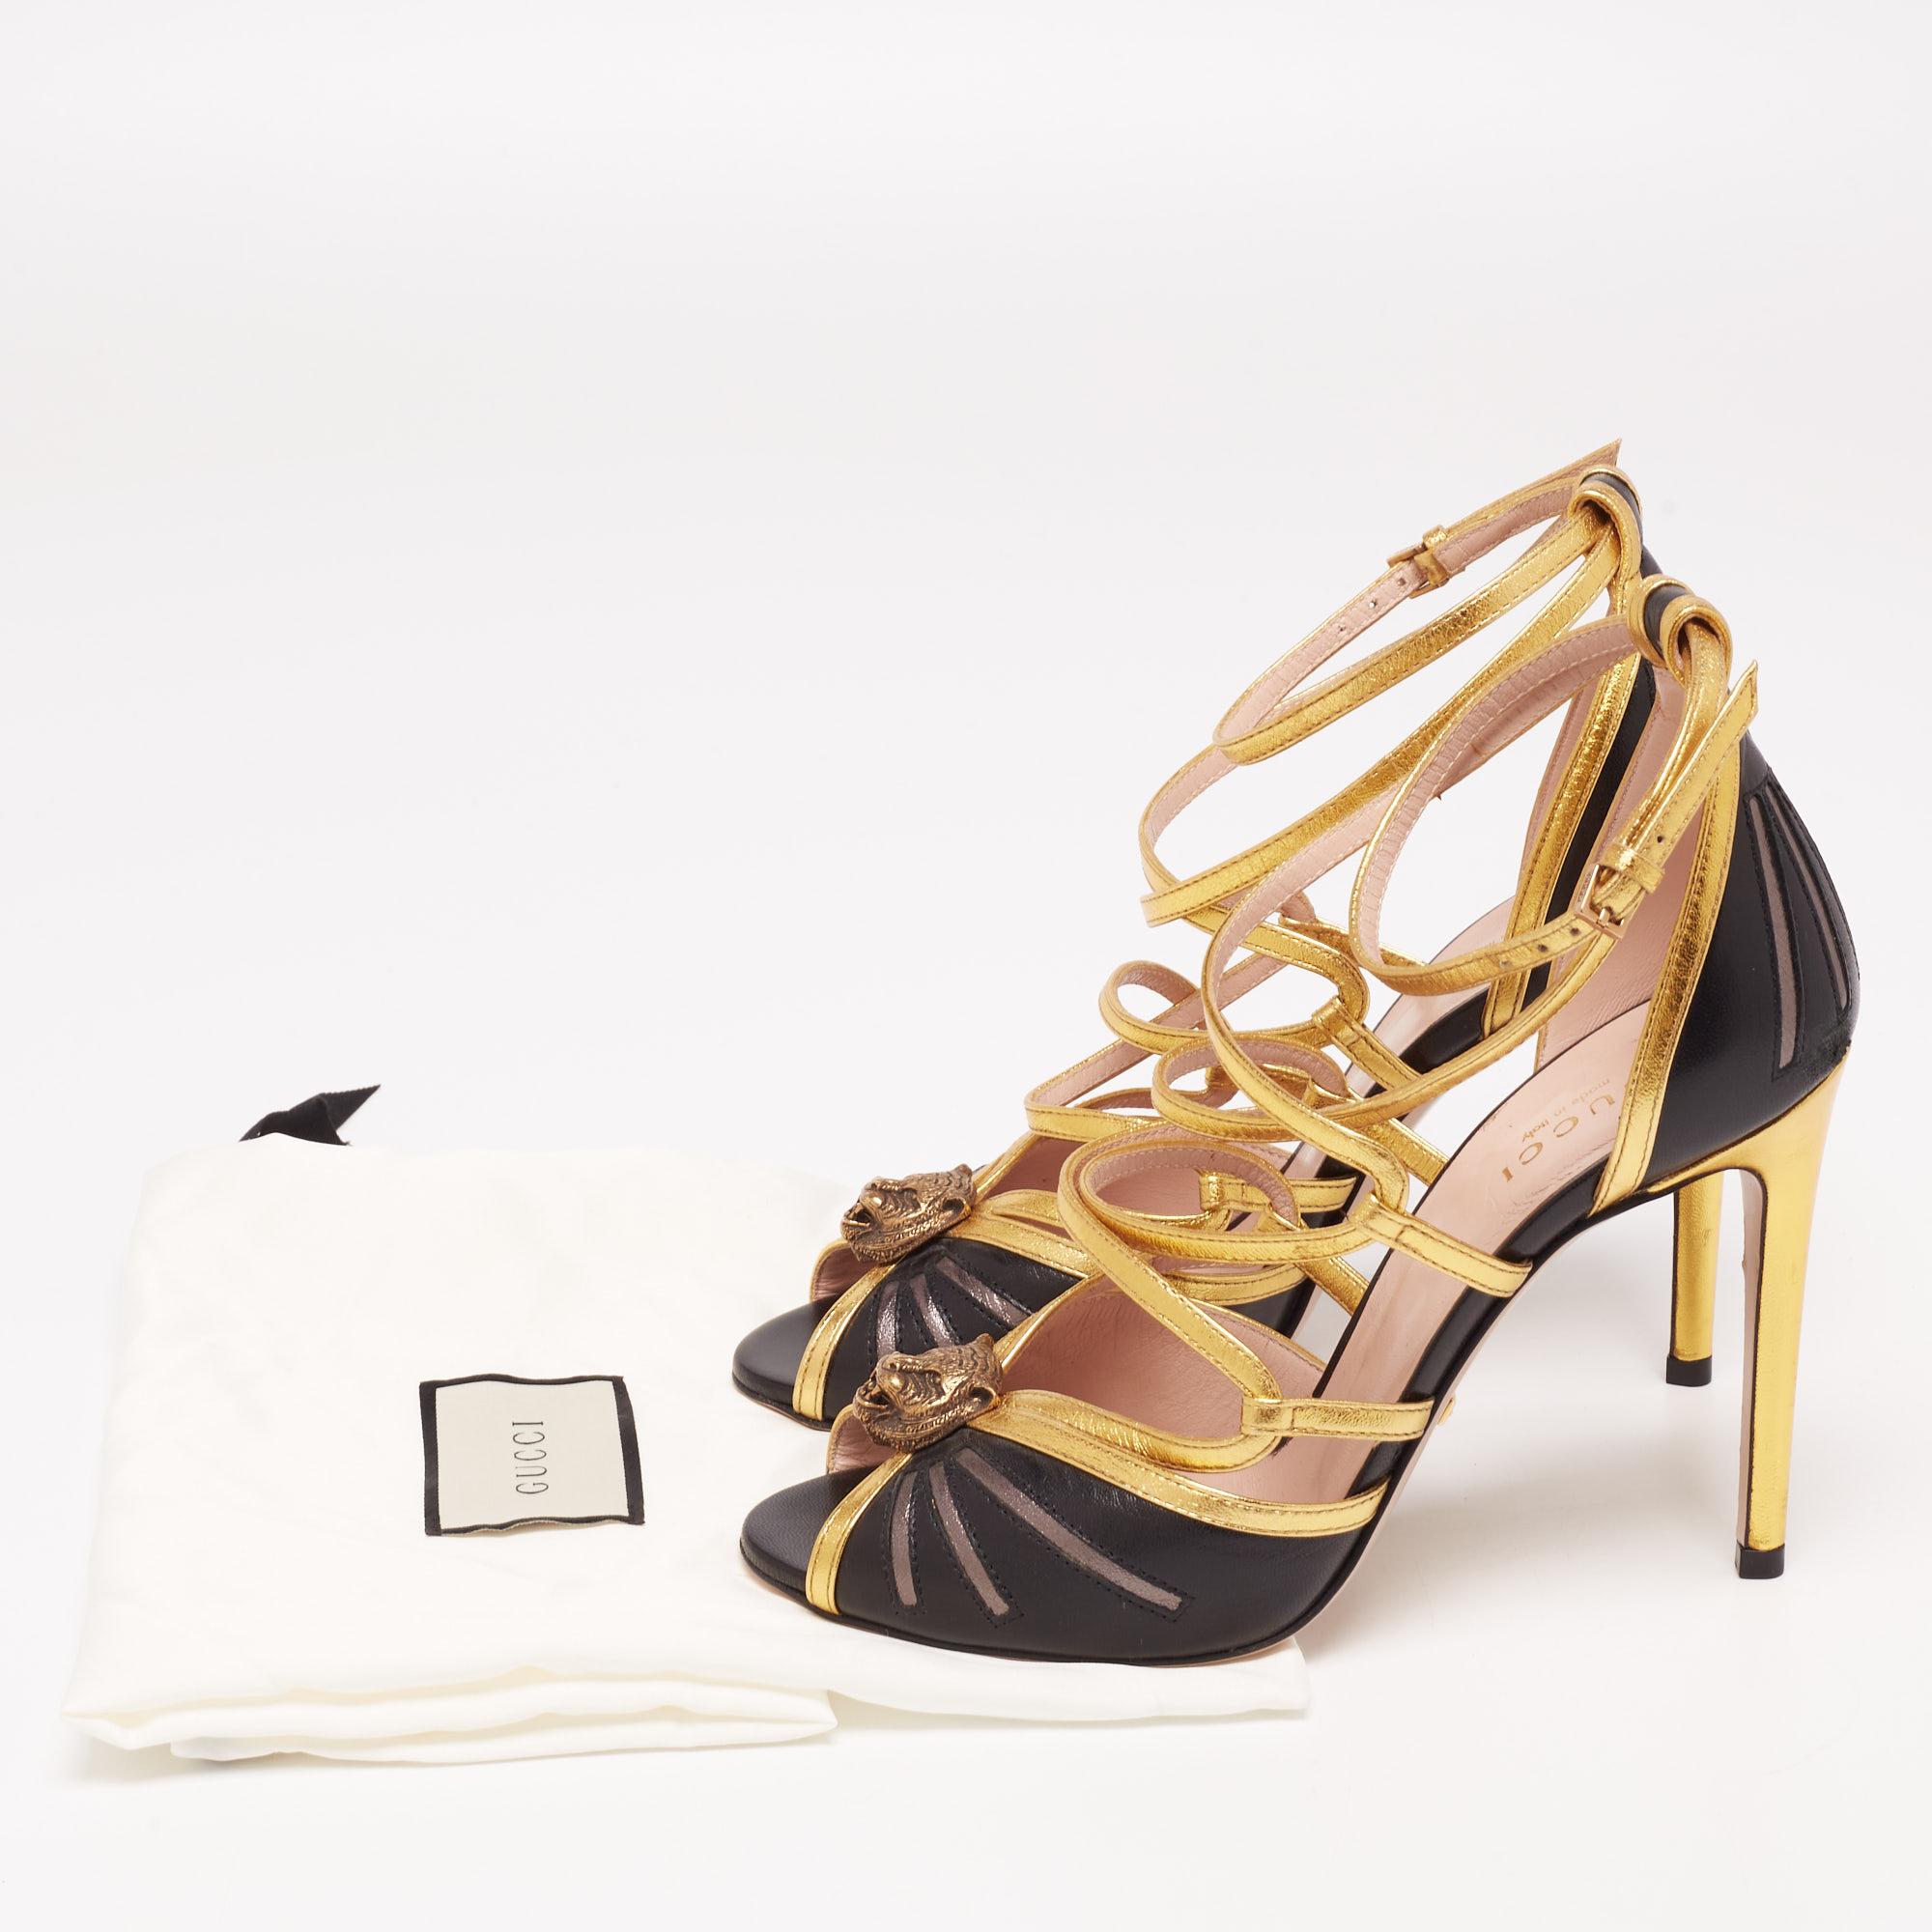 Gucci Black/Gold Leather Tiger Head Strappy Sandals Size 36 1